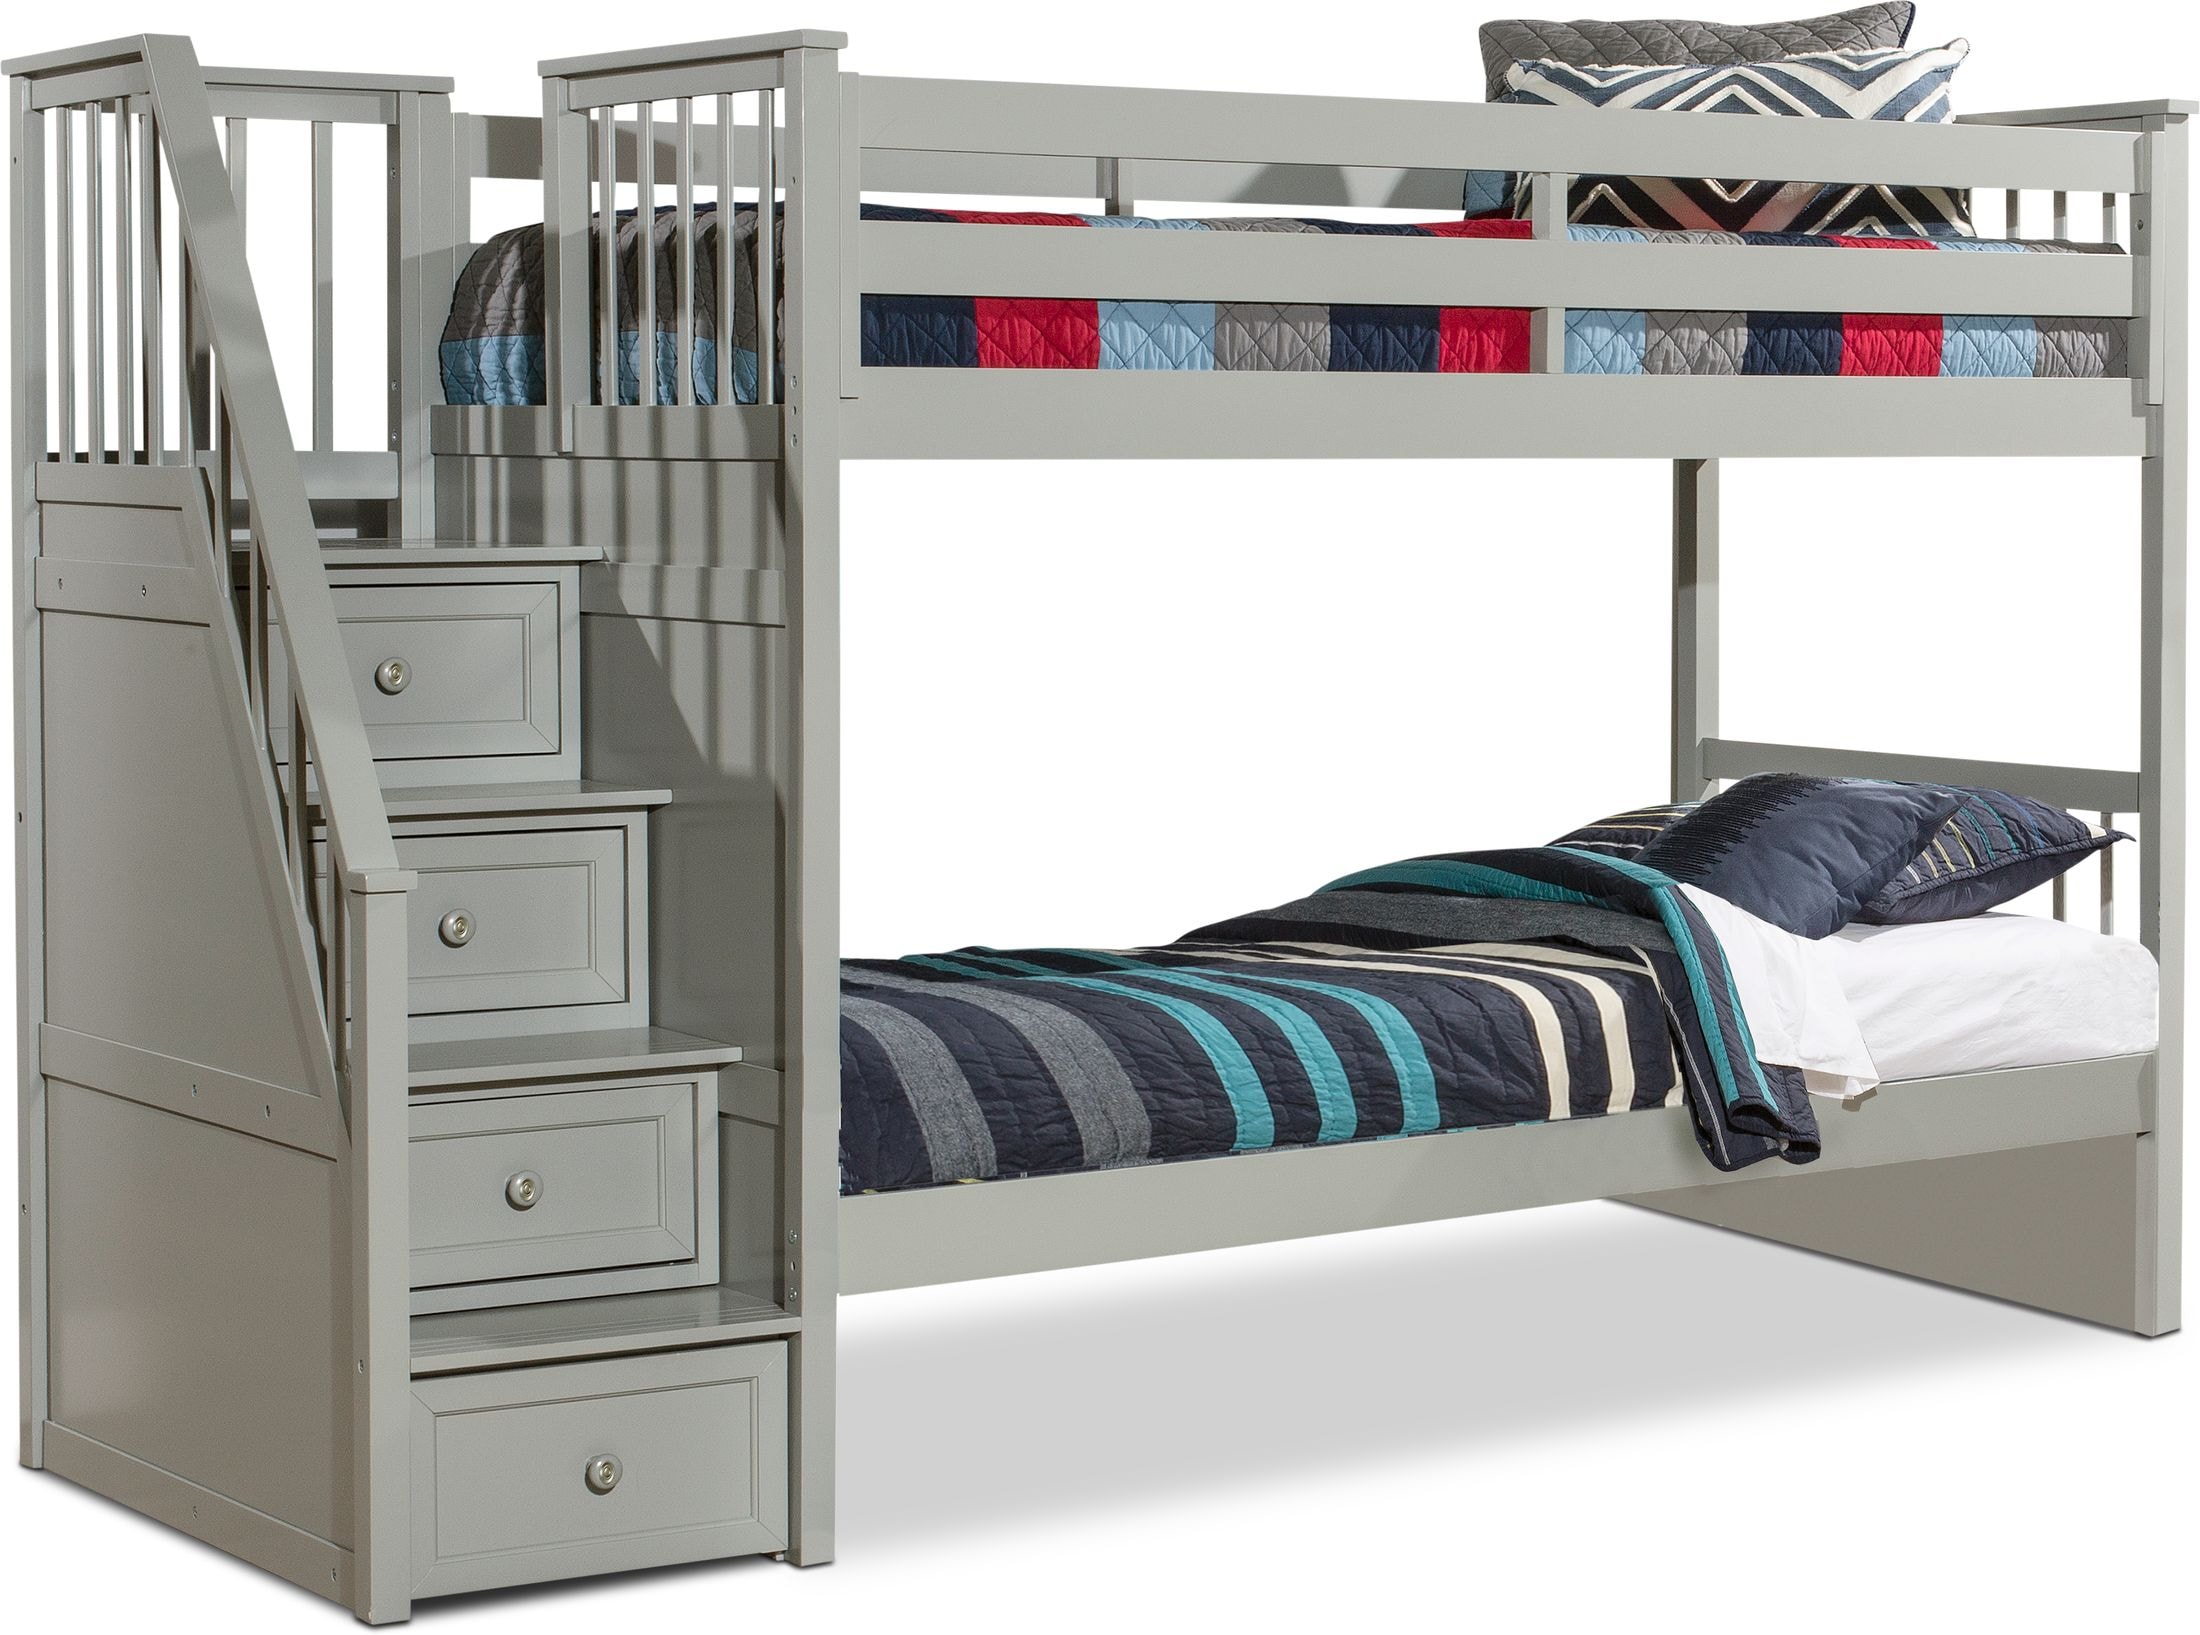 Bunk Bed Stairs Only Thebiosol Com, Berkley Jensen Twin Size Bunk Bed With Trundle Instructions